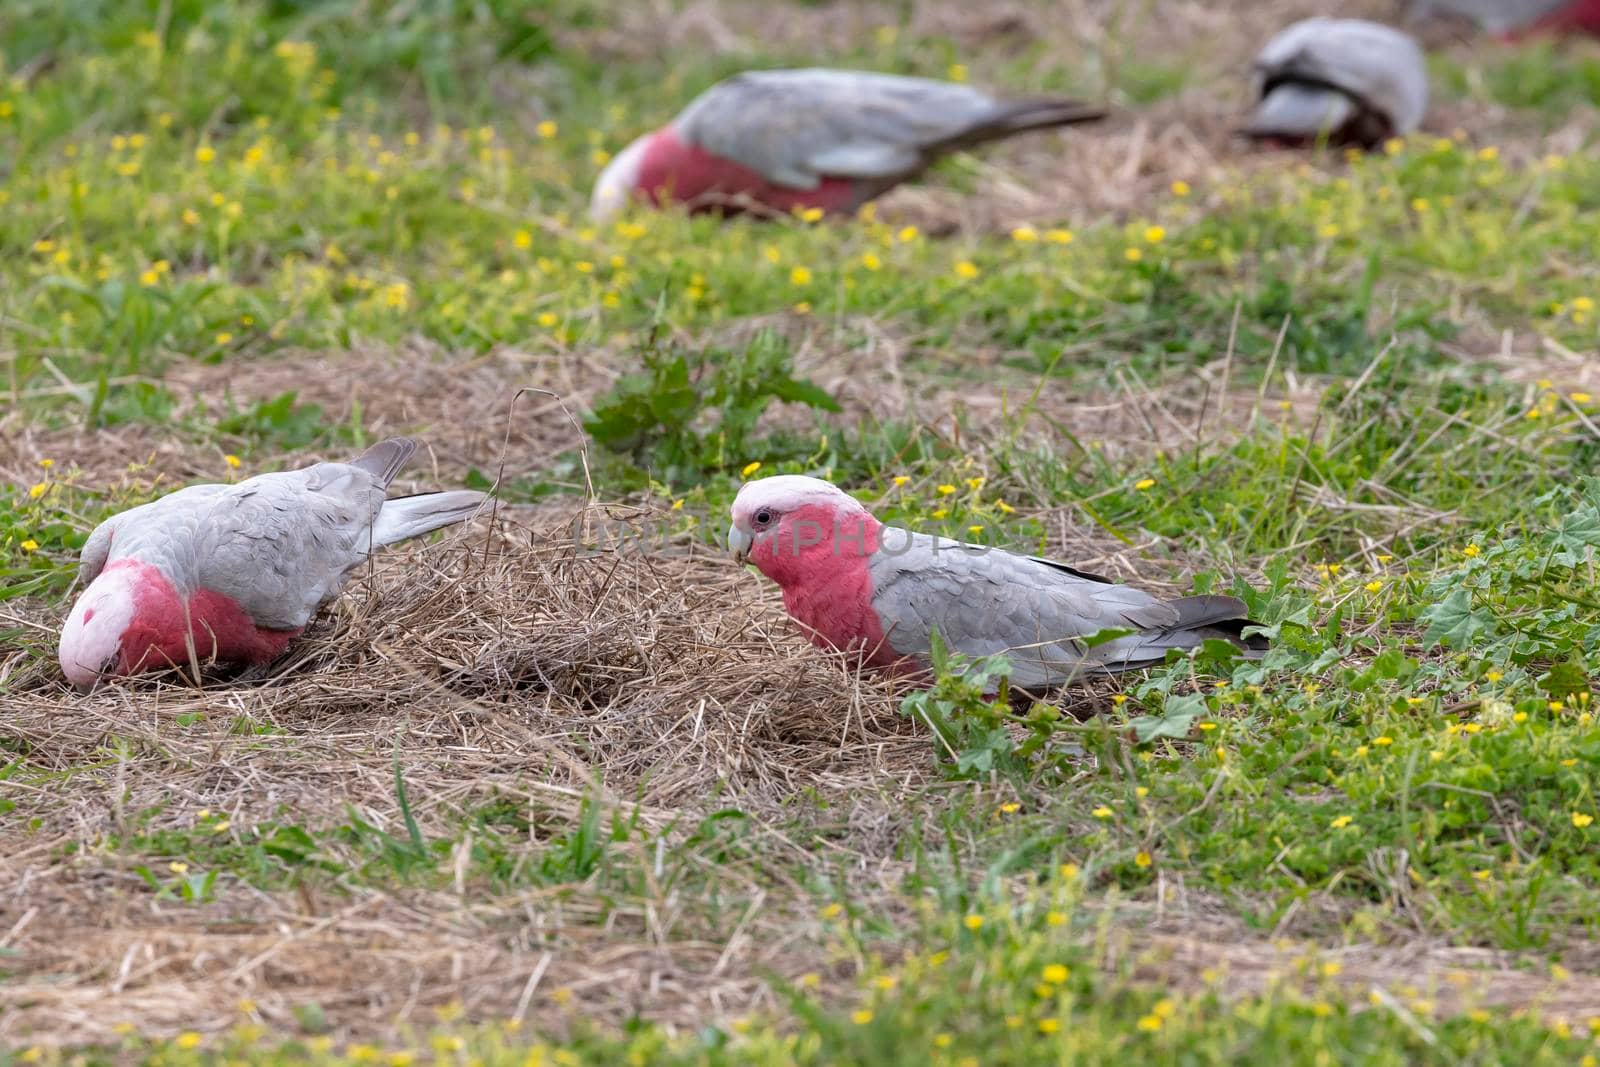 Galah cockatoos foraging for food on the ground in a field with grass and small flowers